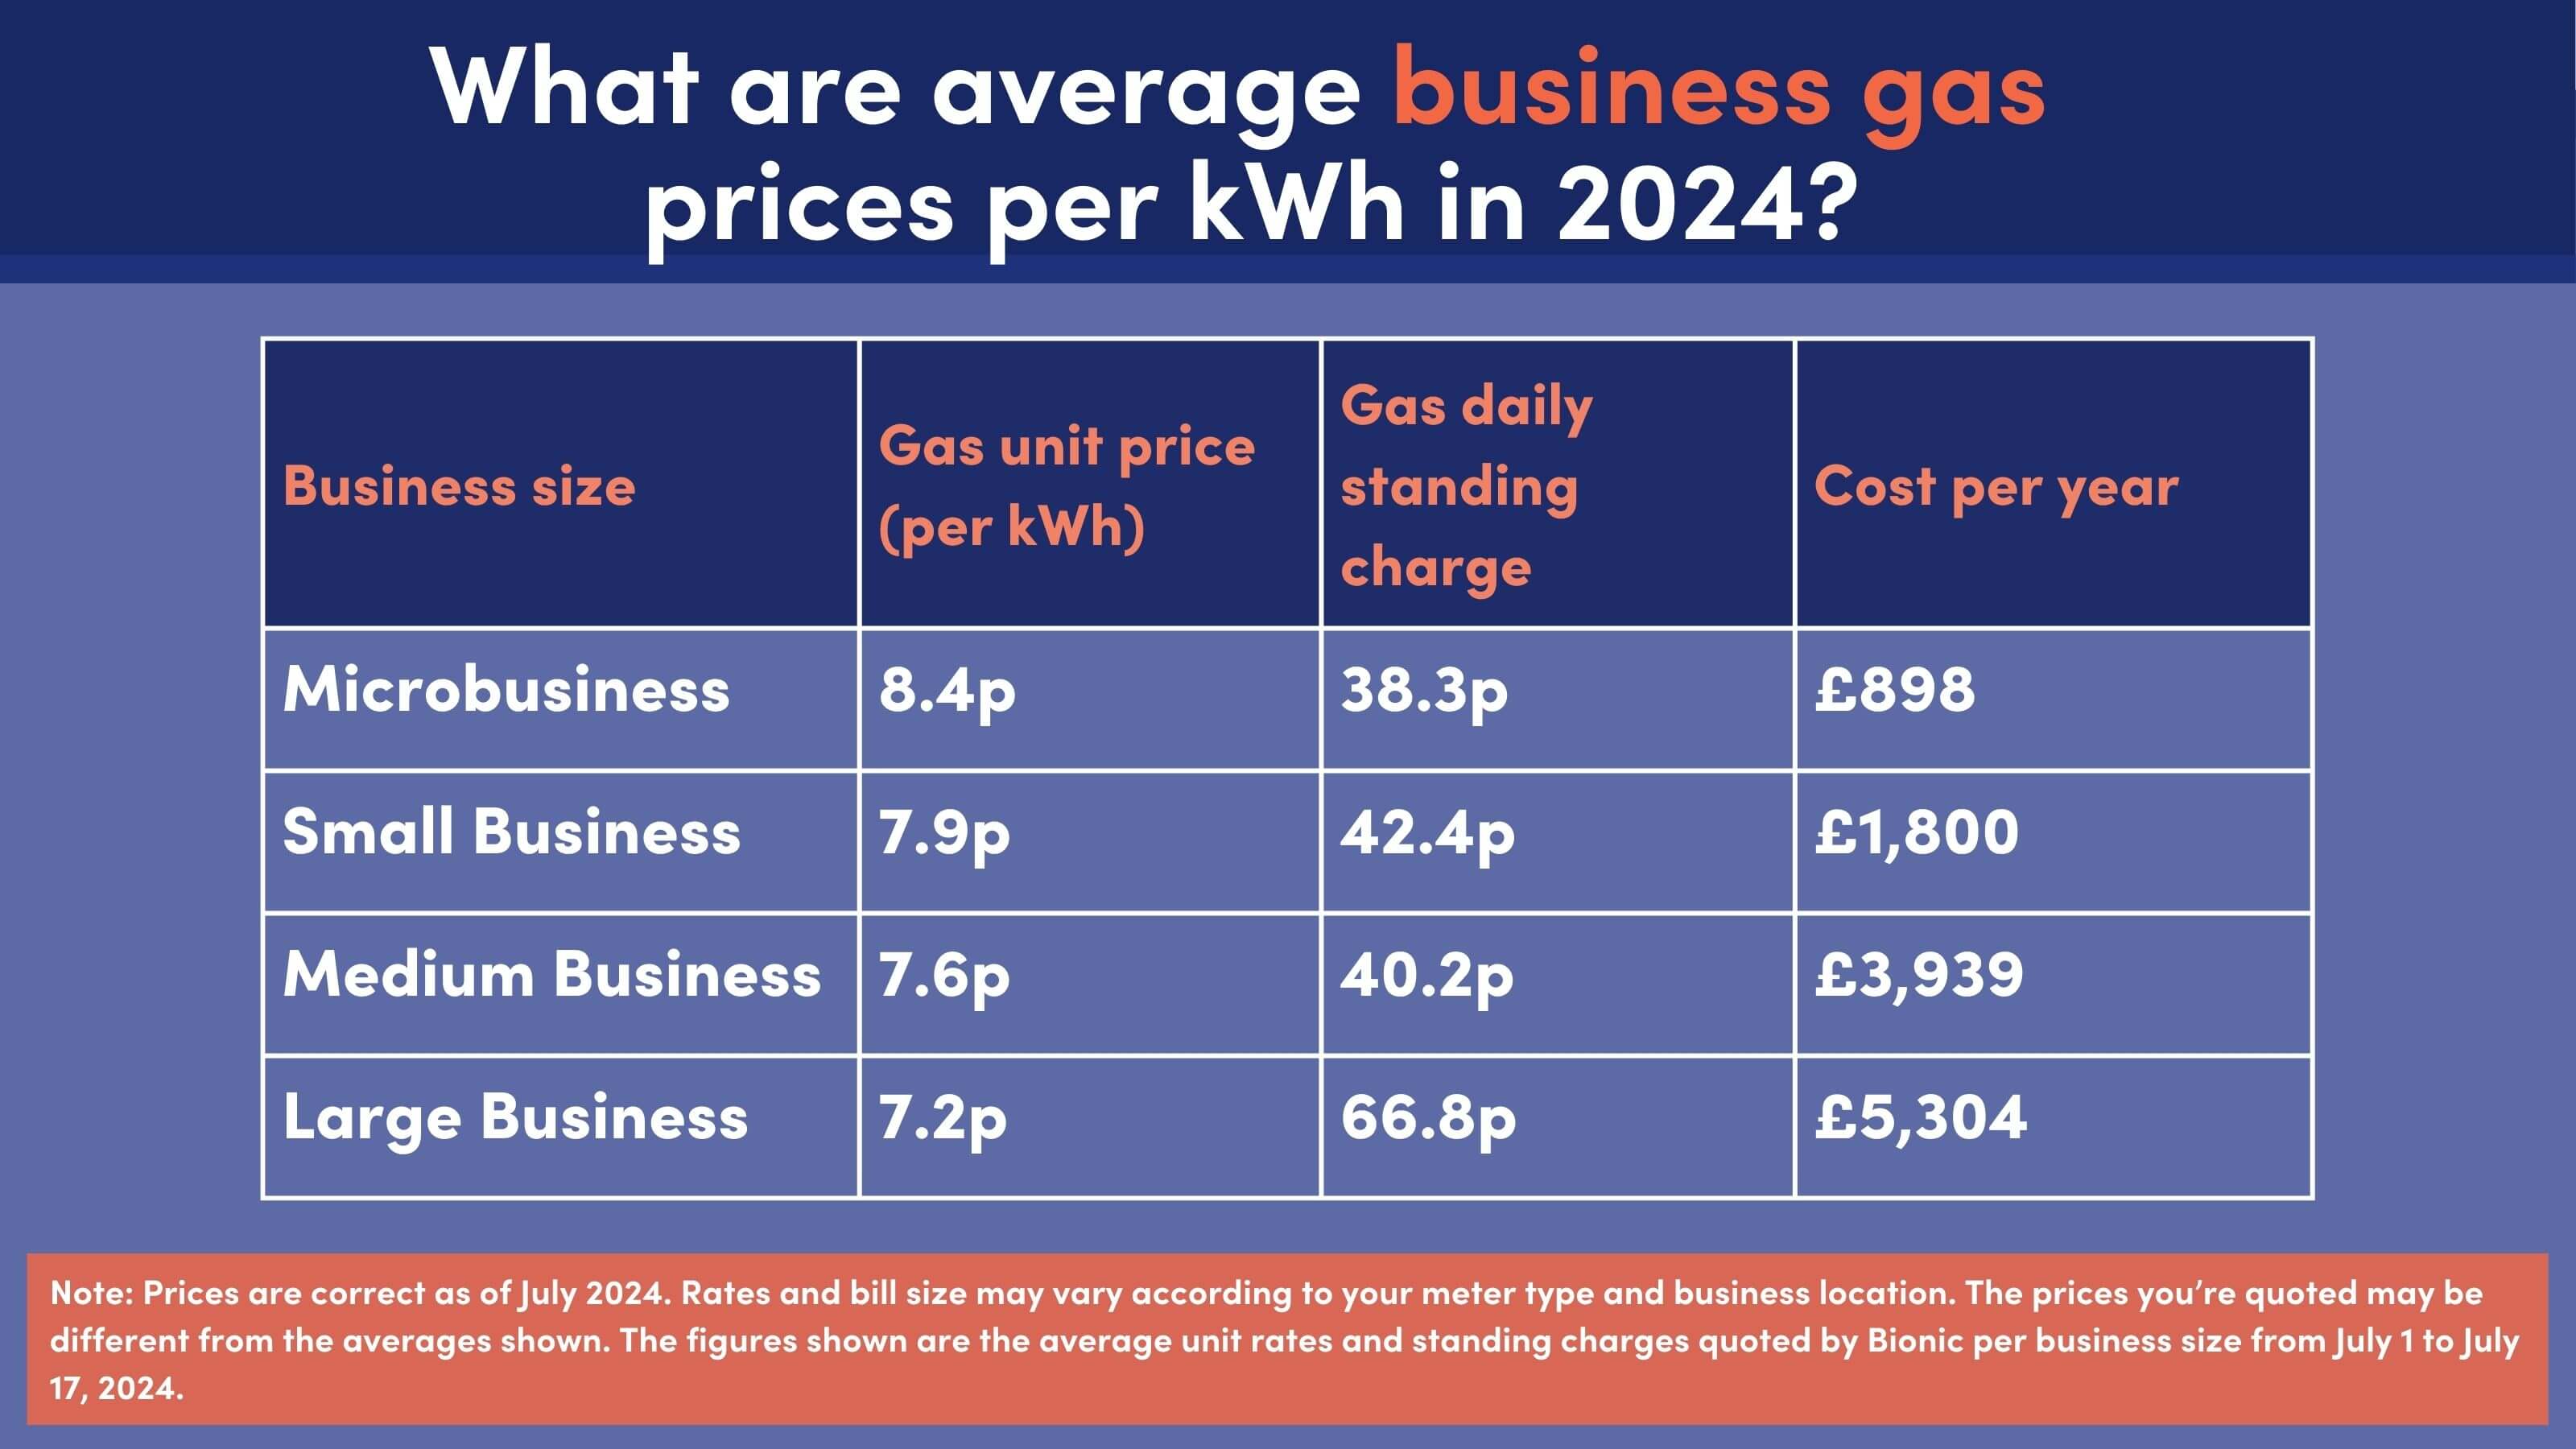 Table showing business gas rates for different business types in July 2024